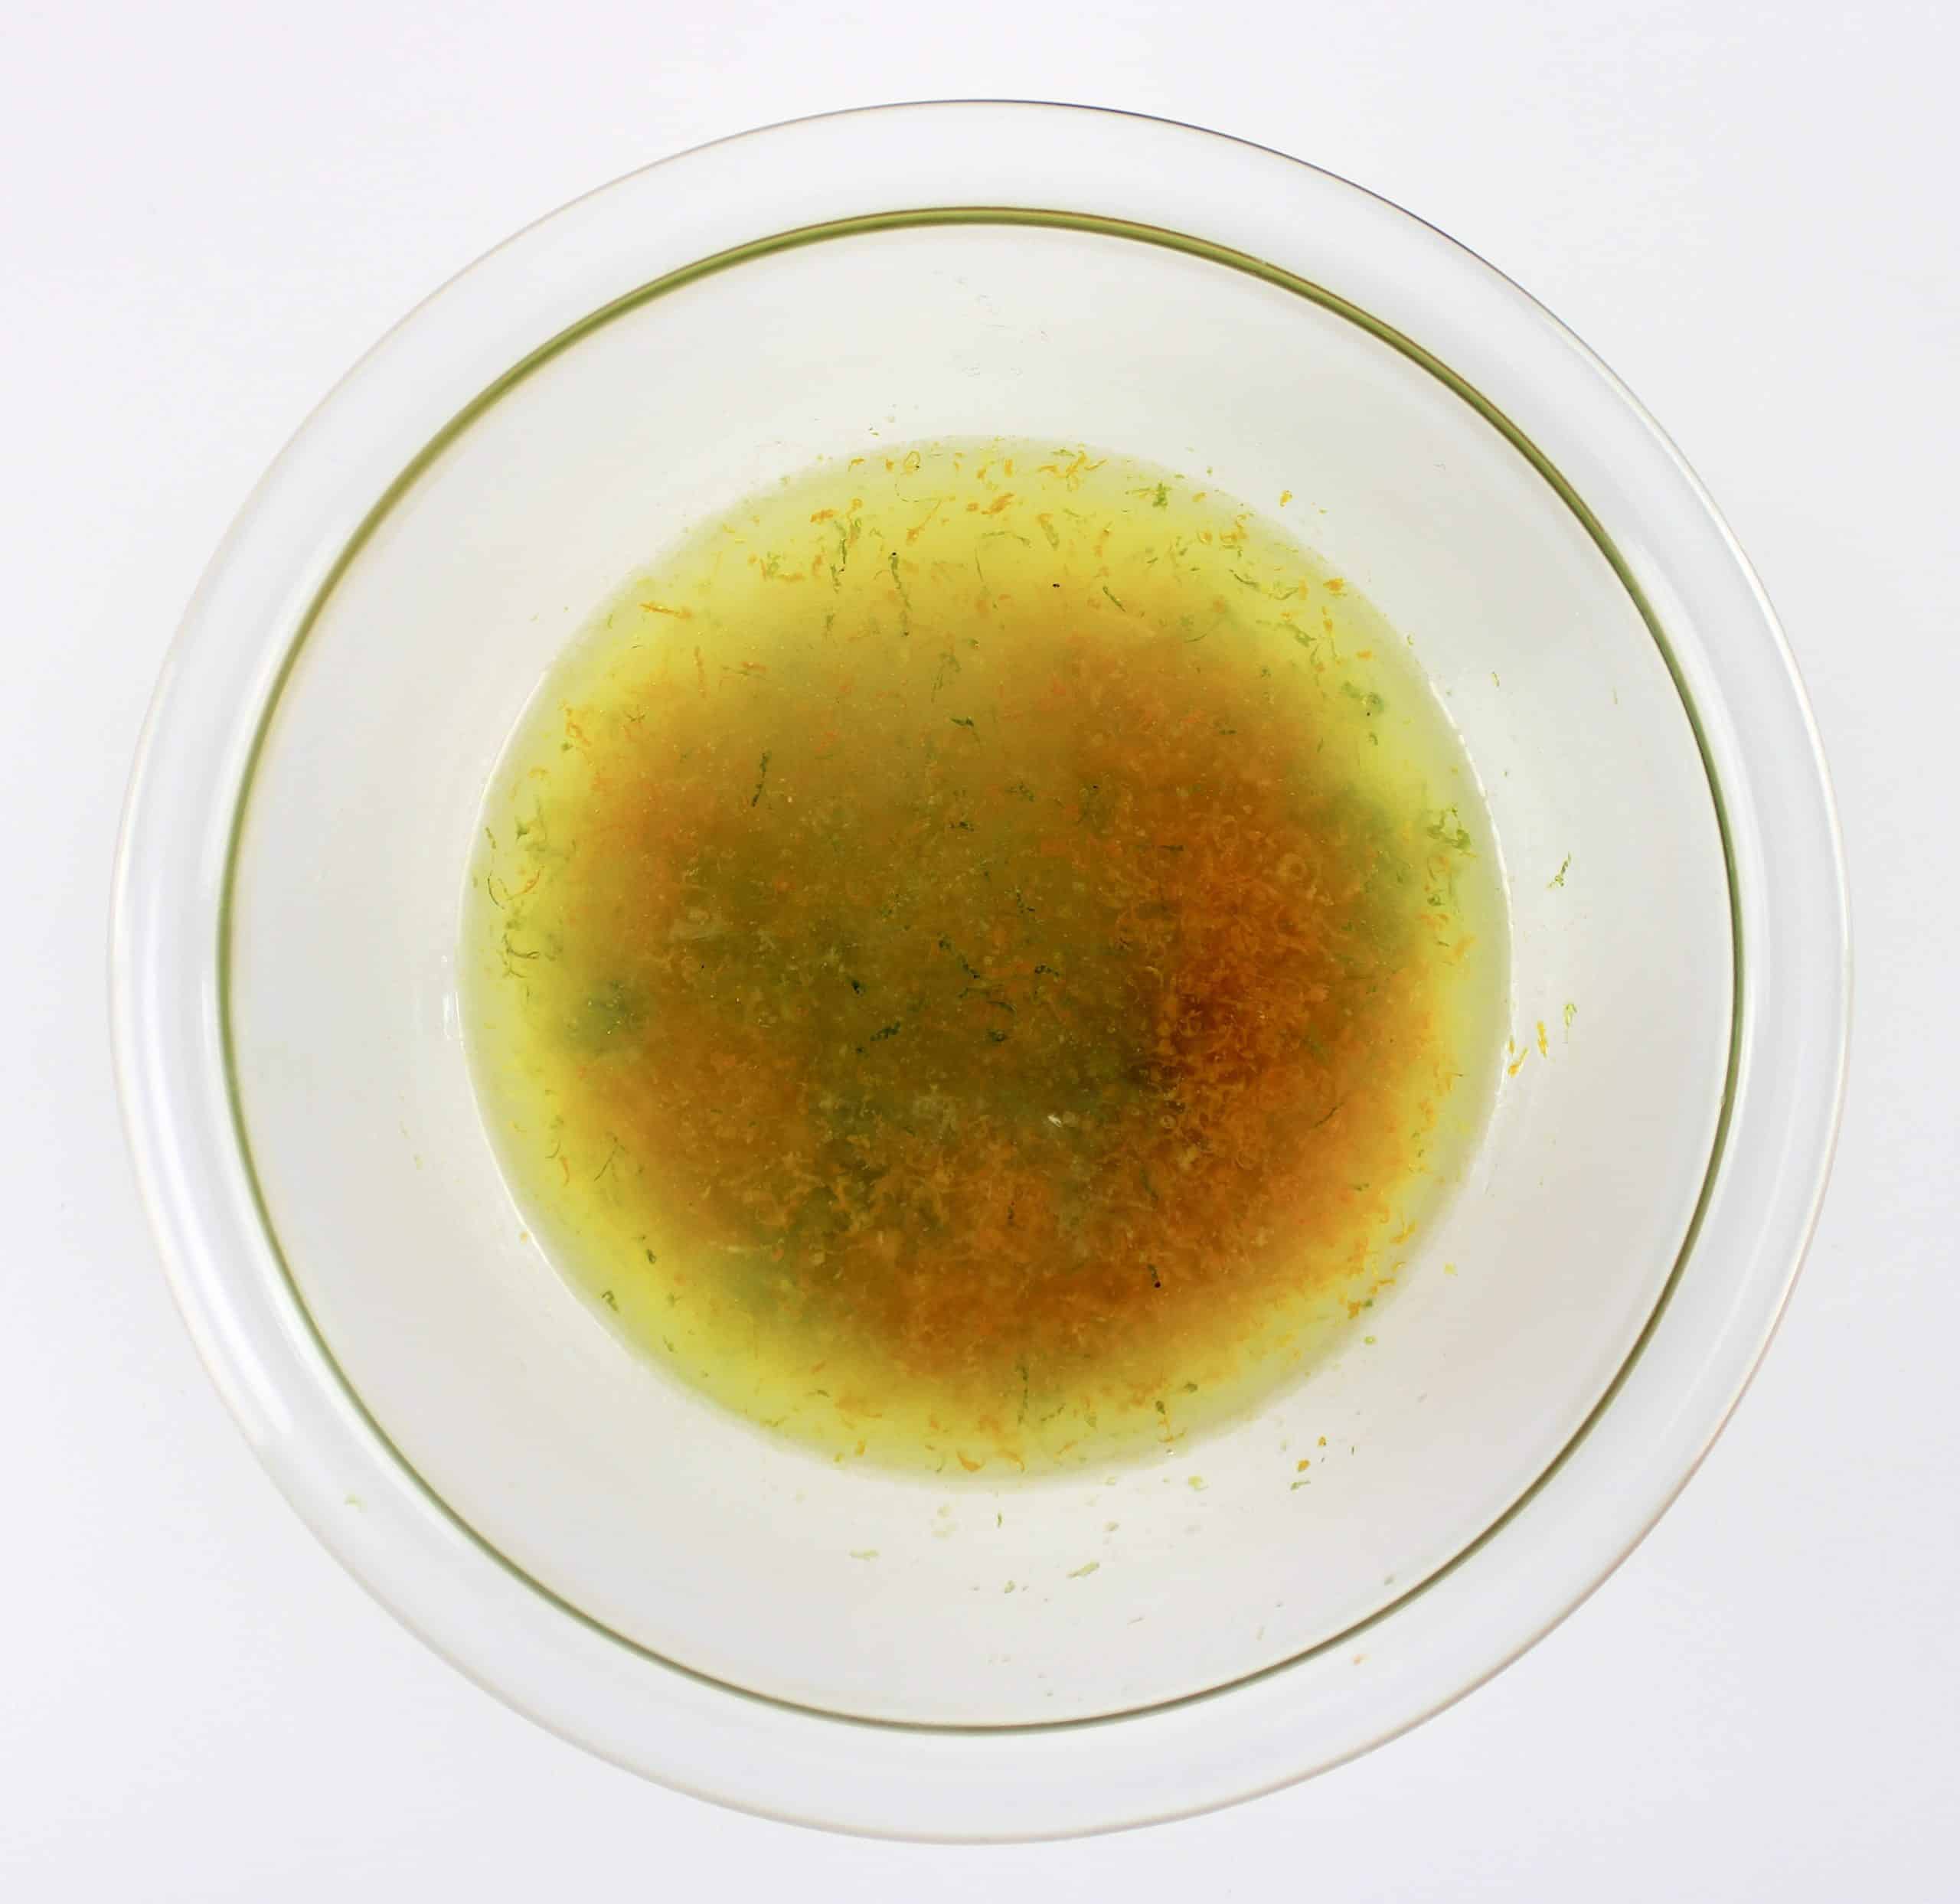 lime lemon and orange juice and zest in glass bowl